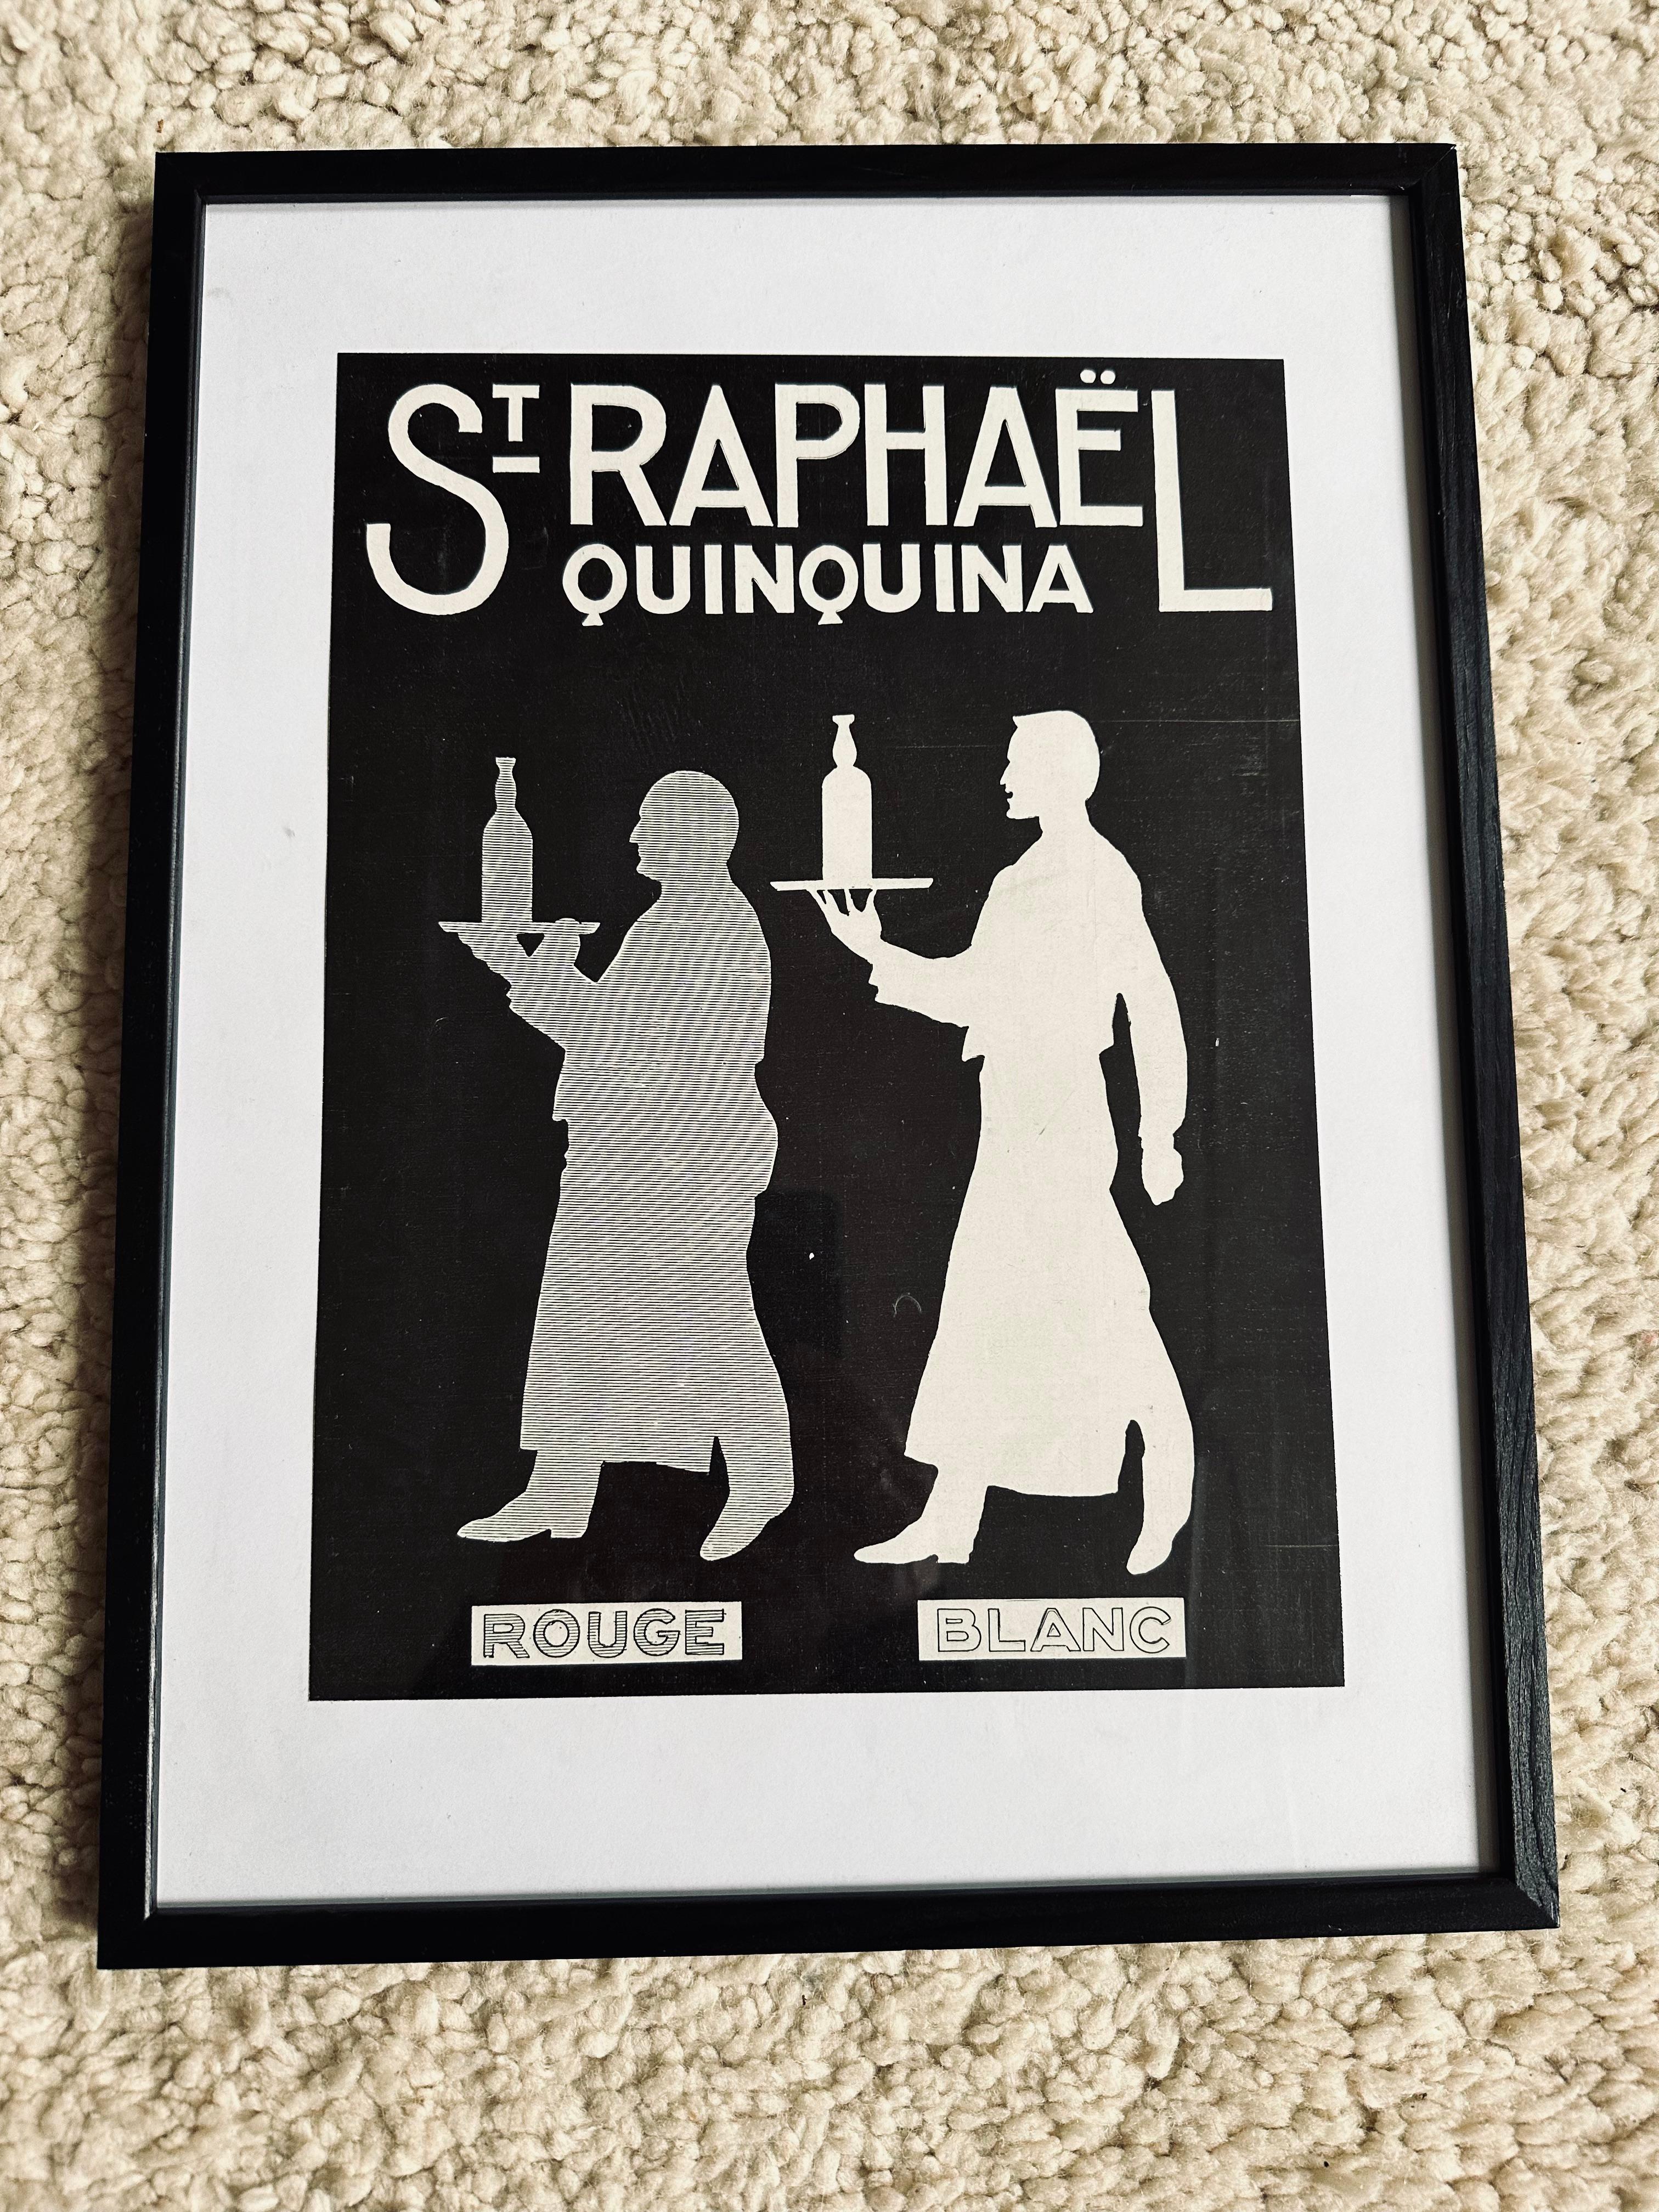 Elevate your appreciation for the past with this captivating 1920s French magazine advertisement featuring St. Raphael Quinquina Rouge and Blanc. This original offset print, encased in a rustic wooden frame, showcases the allure of the era.

Step